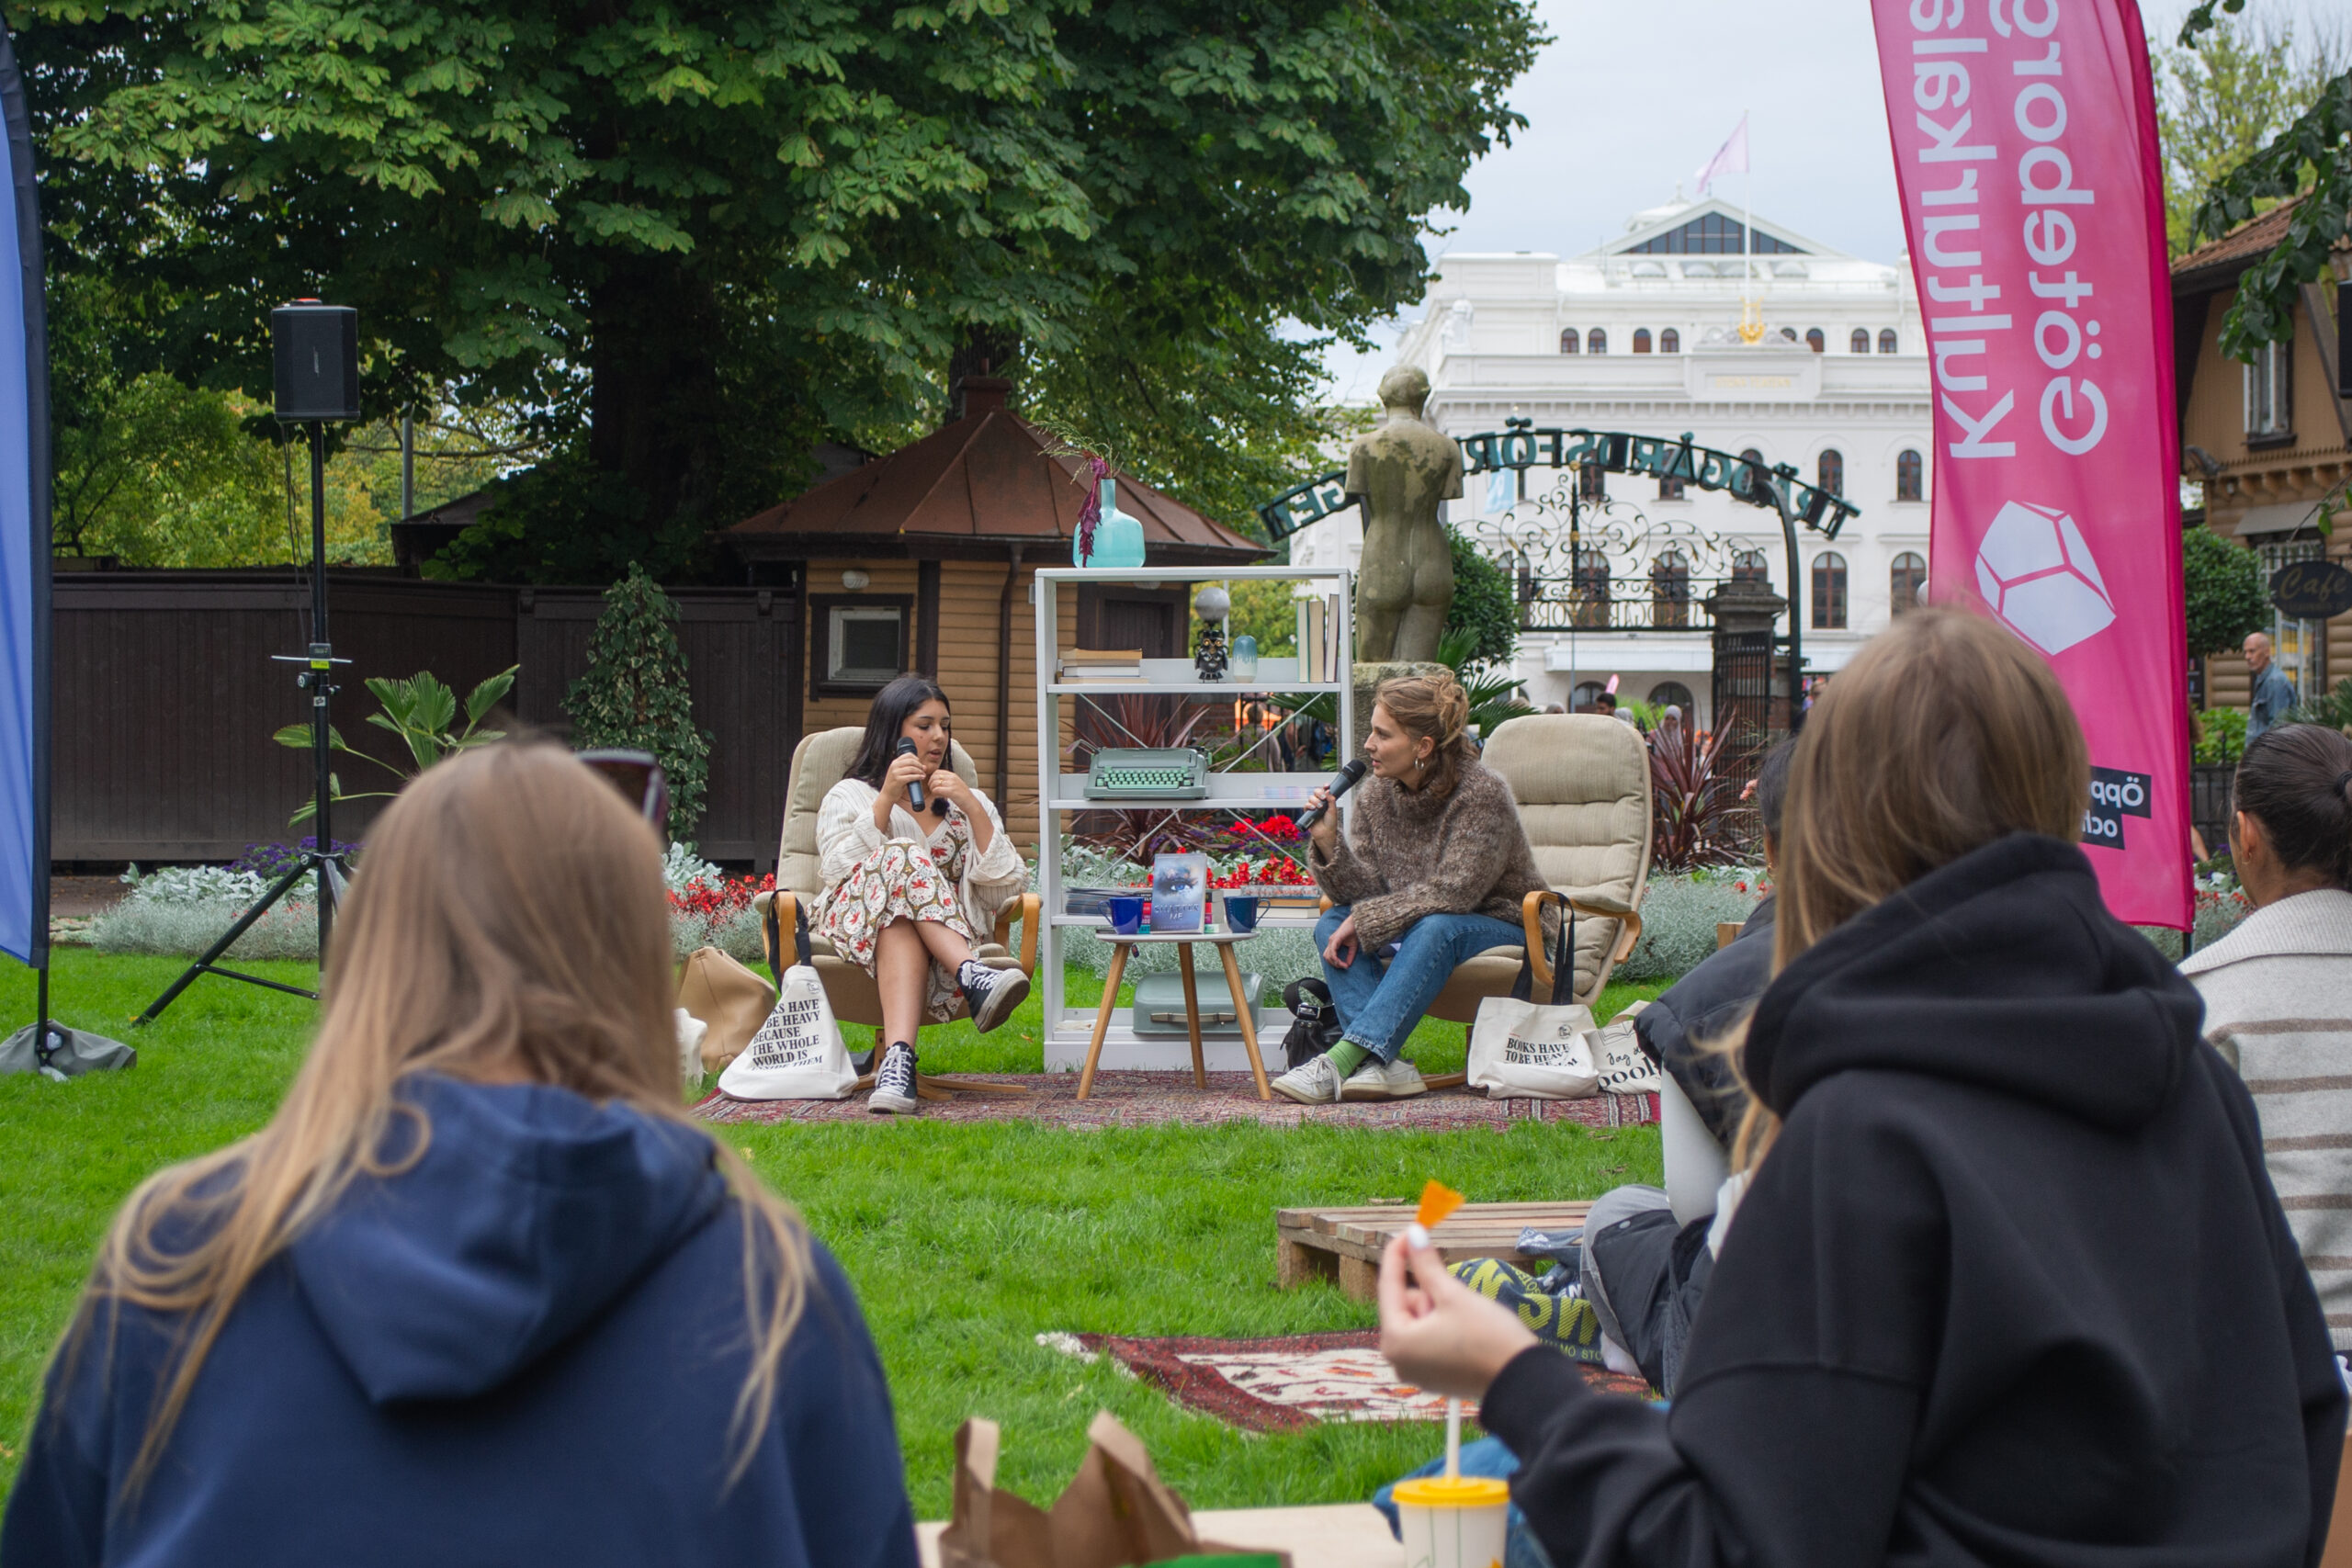 Jasmine Darban and a person from Bokmässan (eng: the Book Fair) discuss books. They each sit in a beige and cozy armchair in the Garden Association. In the foreground, people are seen listening and having coffee, they have their backs to the camera and are sitting on a blanket.